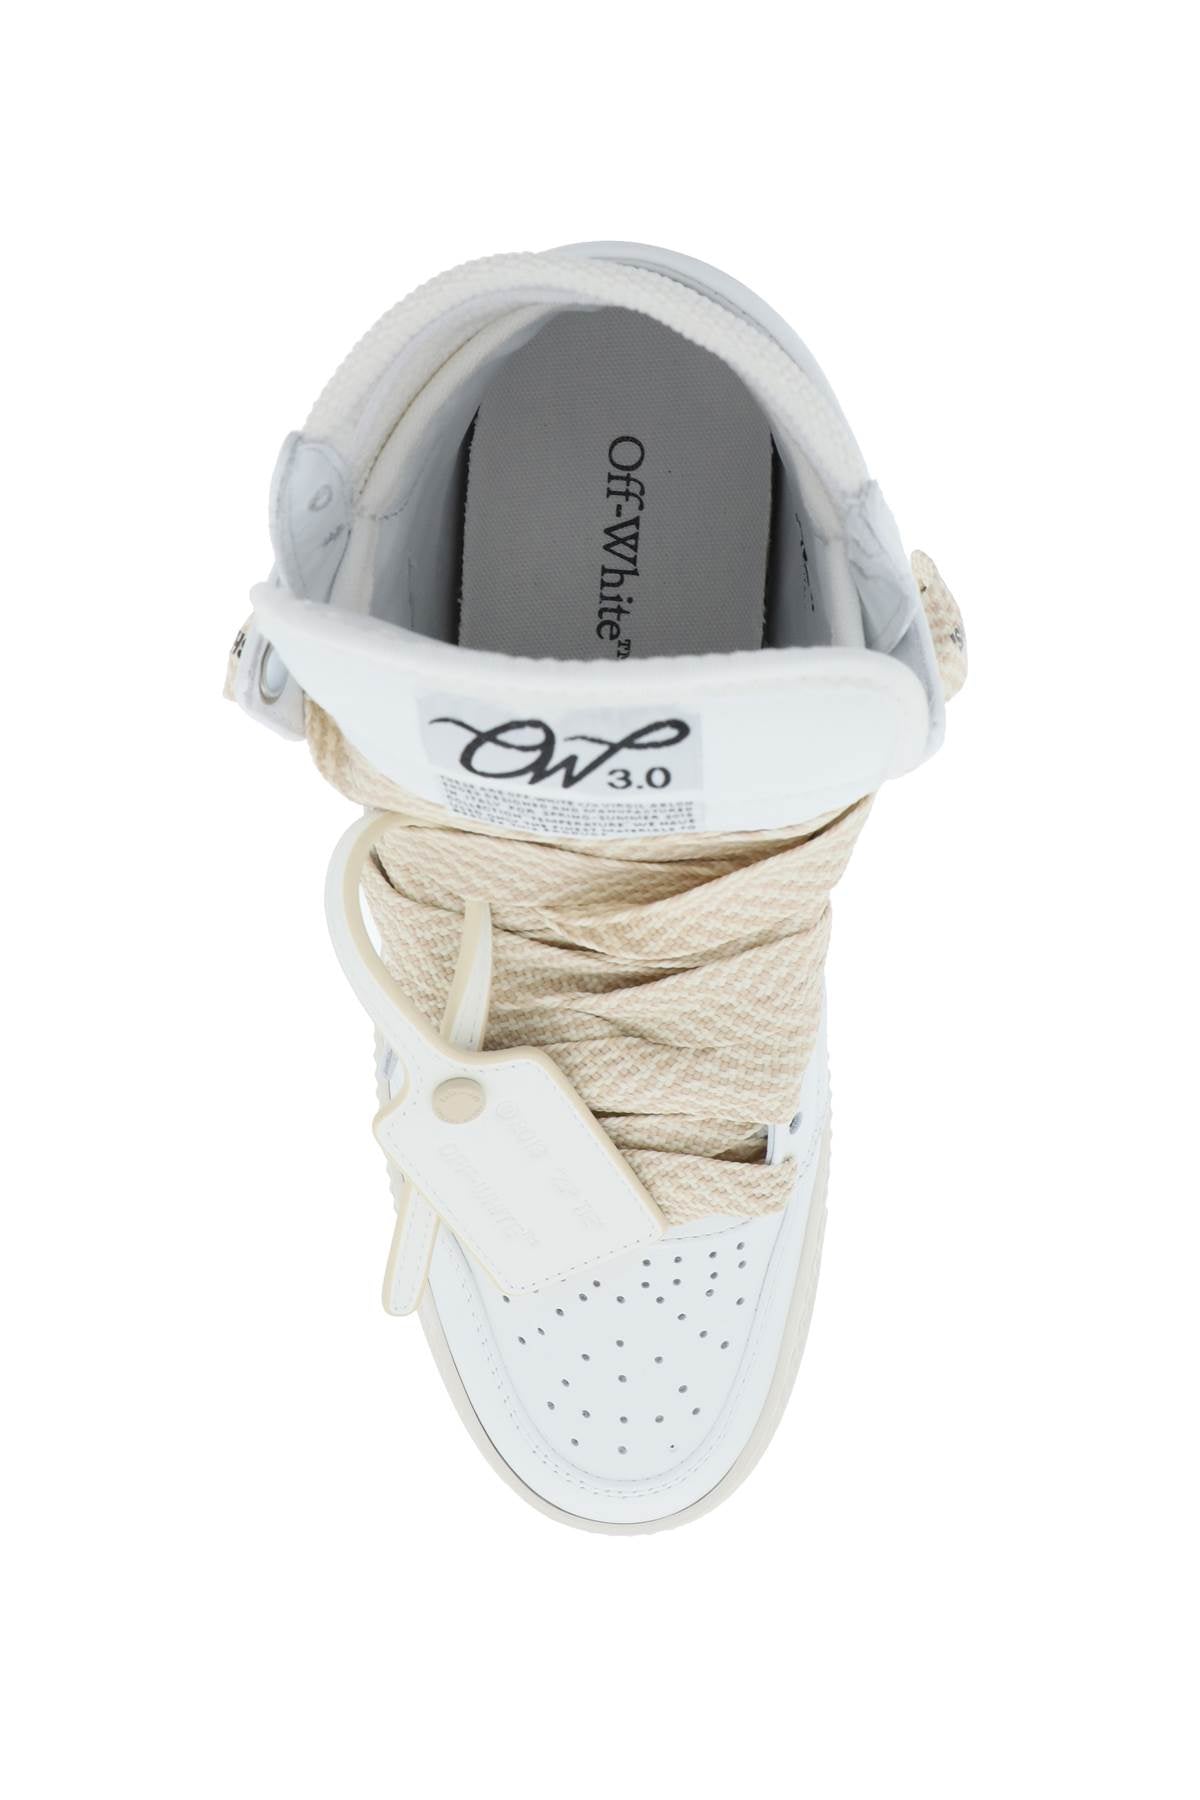 OFF-WHITE 3.0 OFF-COURT Sneaker for Women - Classic Basketball Style with Leather and Stretch Knit